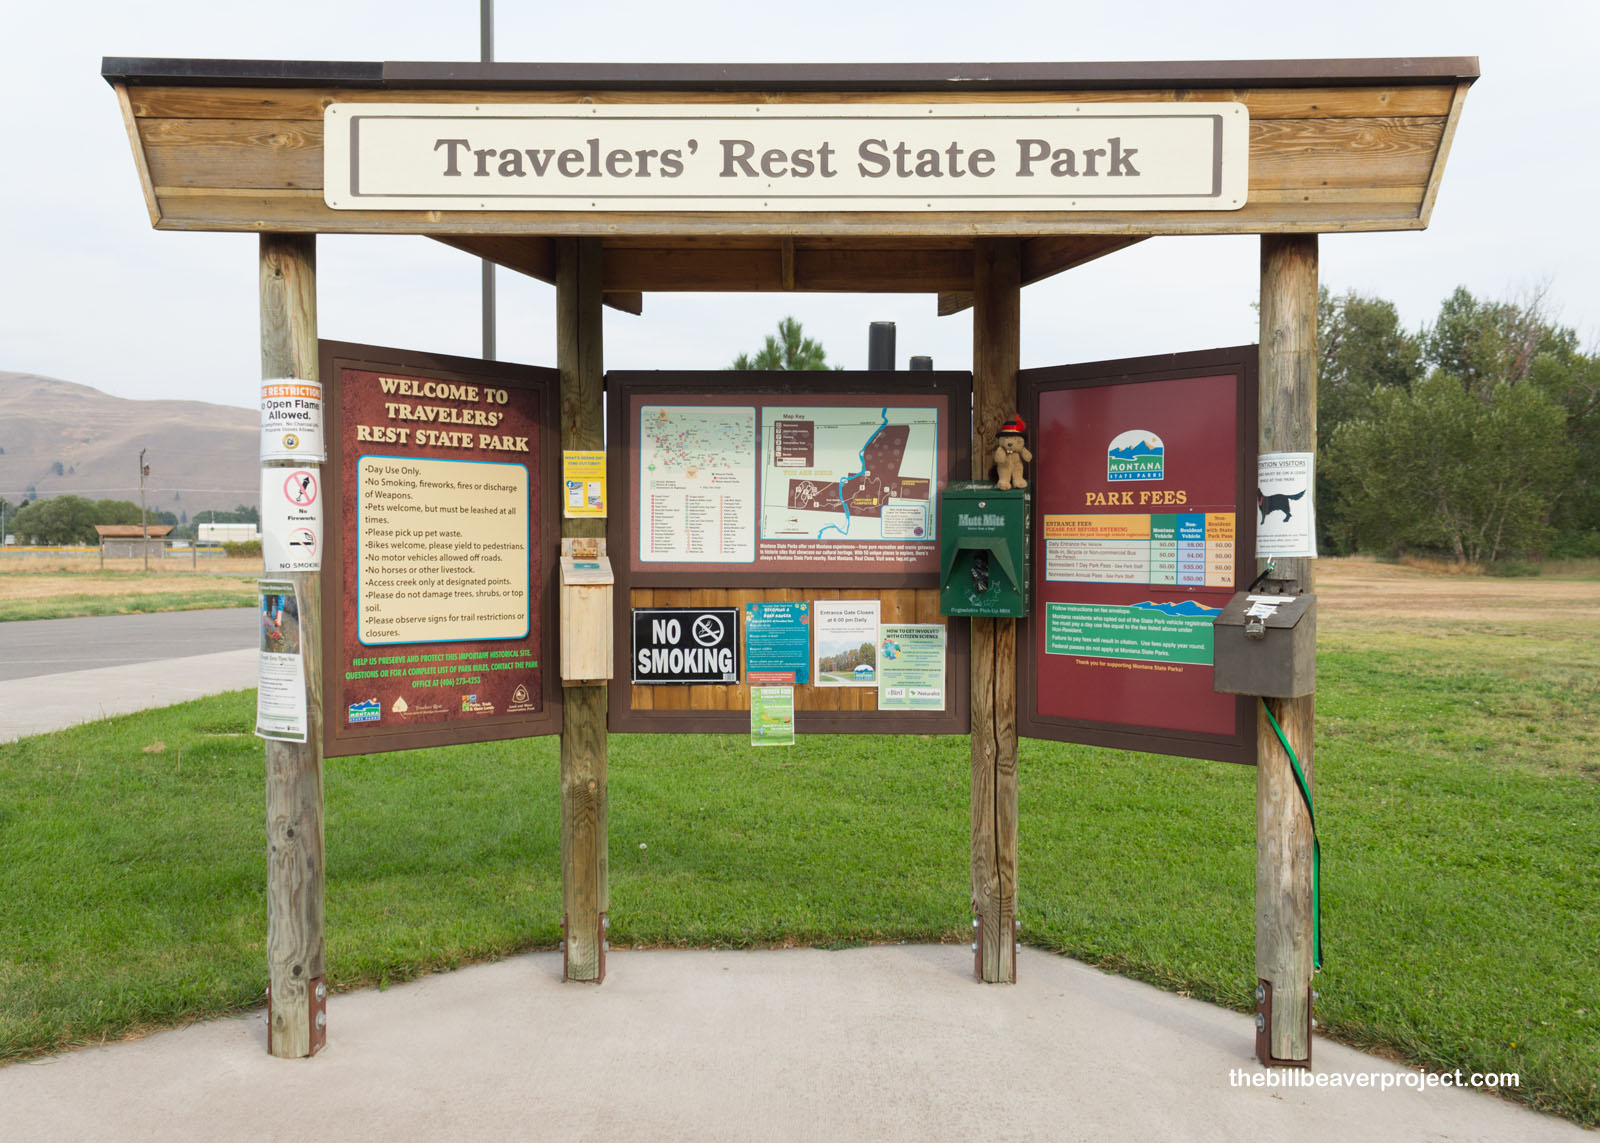 Travelers' Rest State Park